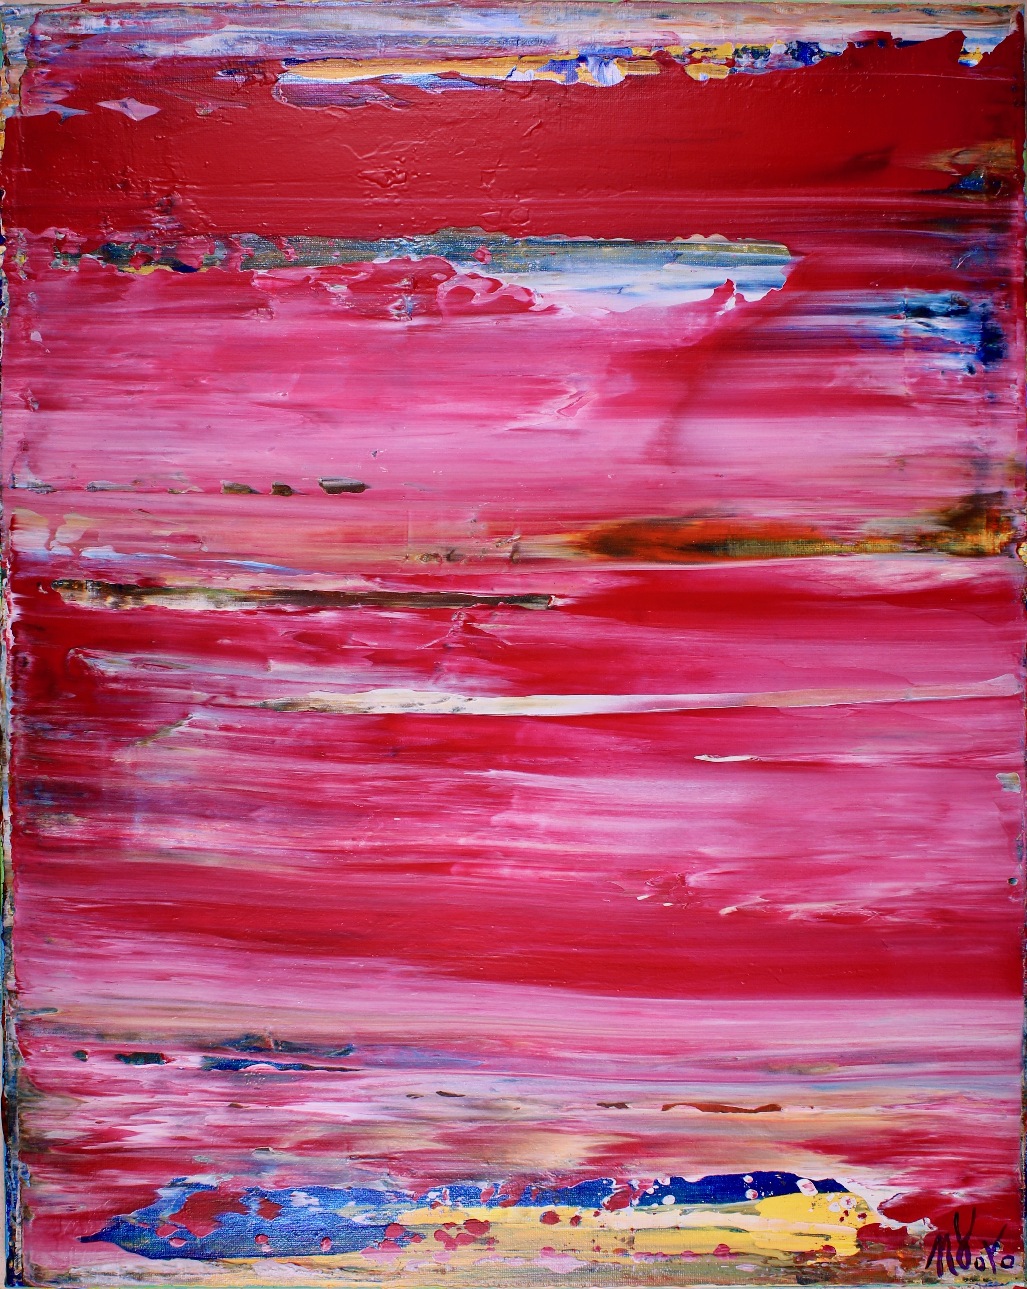 Detail View - Red Frequency by abstract painter - Nestor Toro in Los Angeles